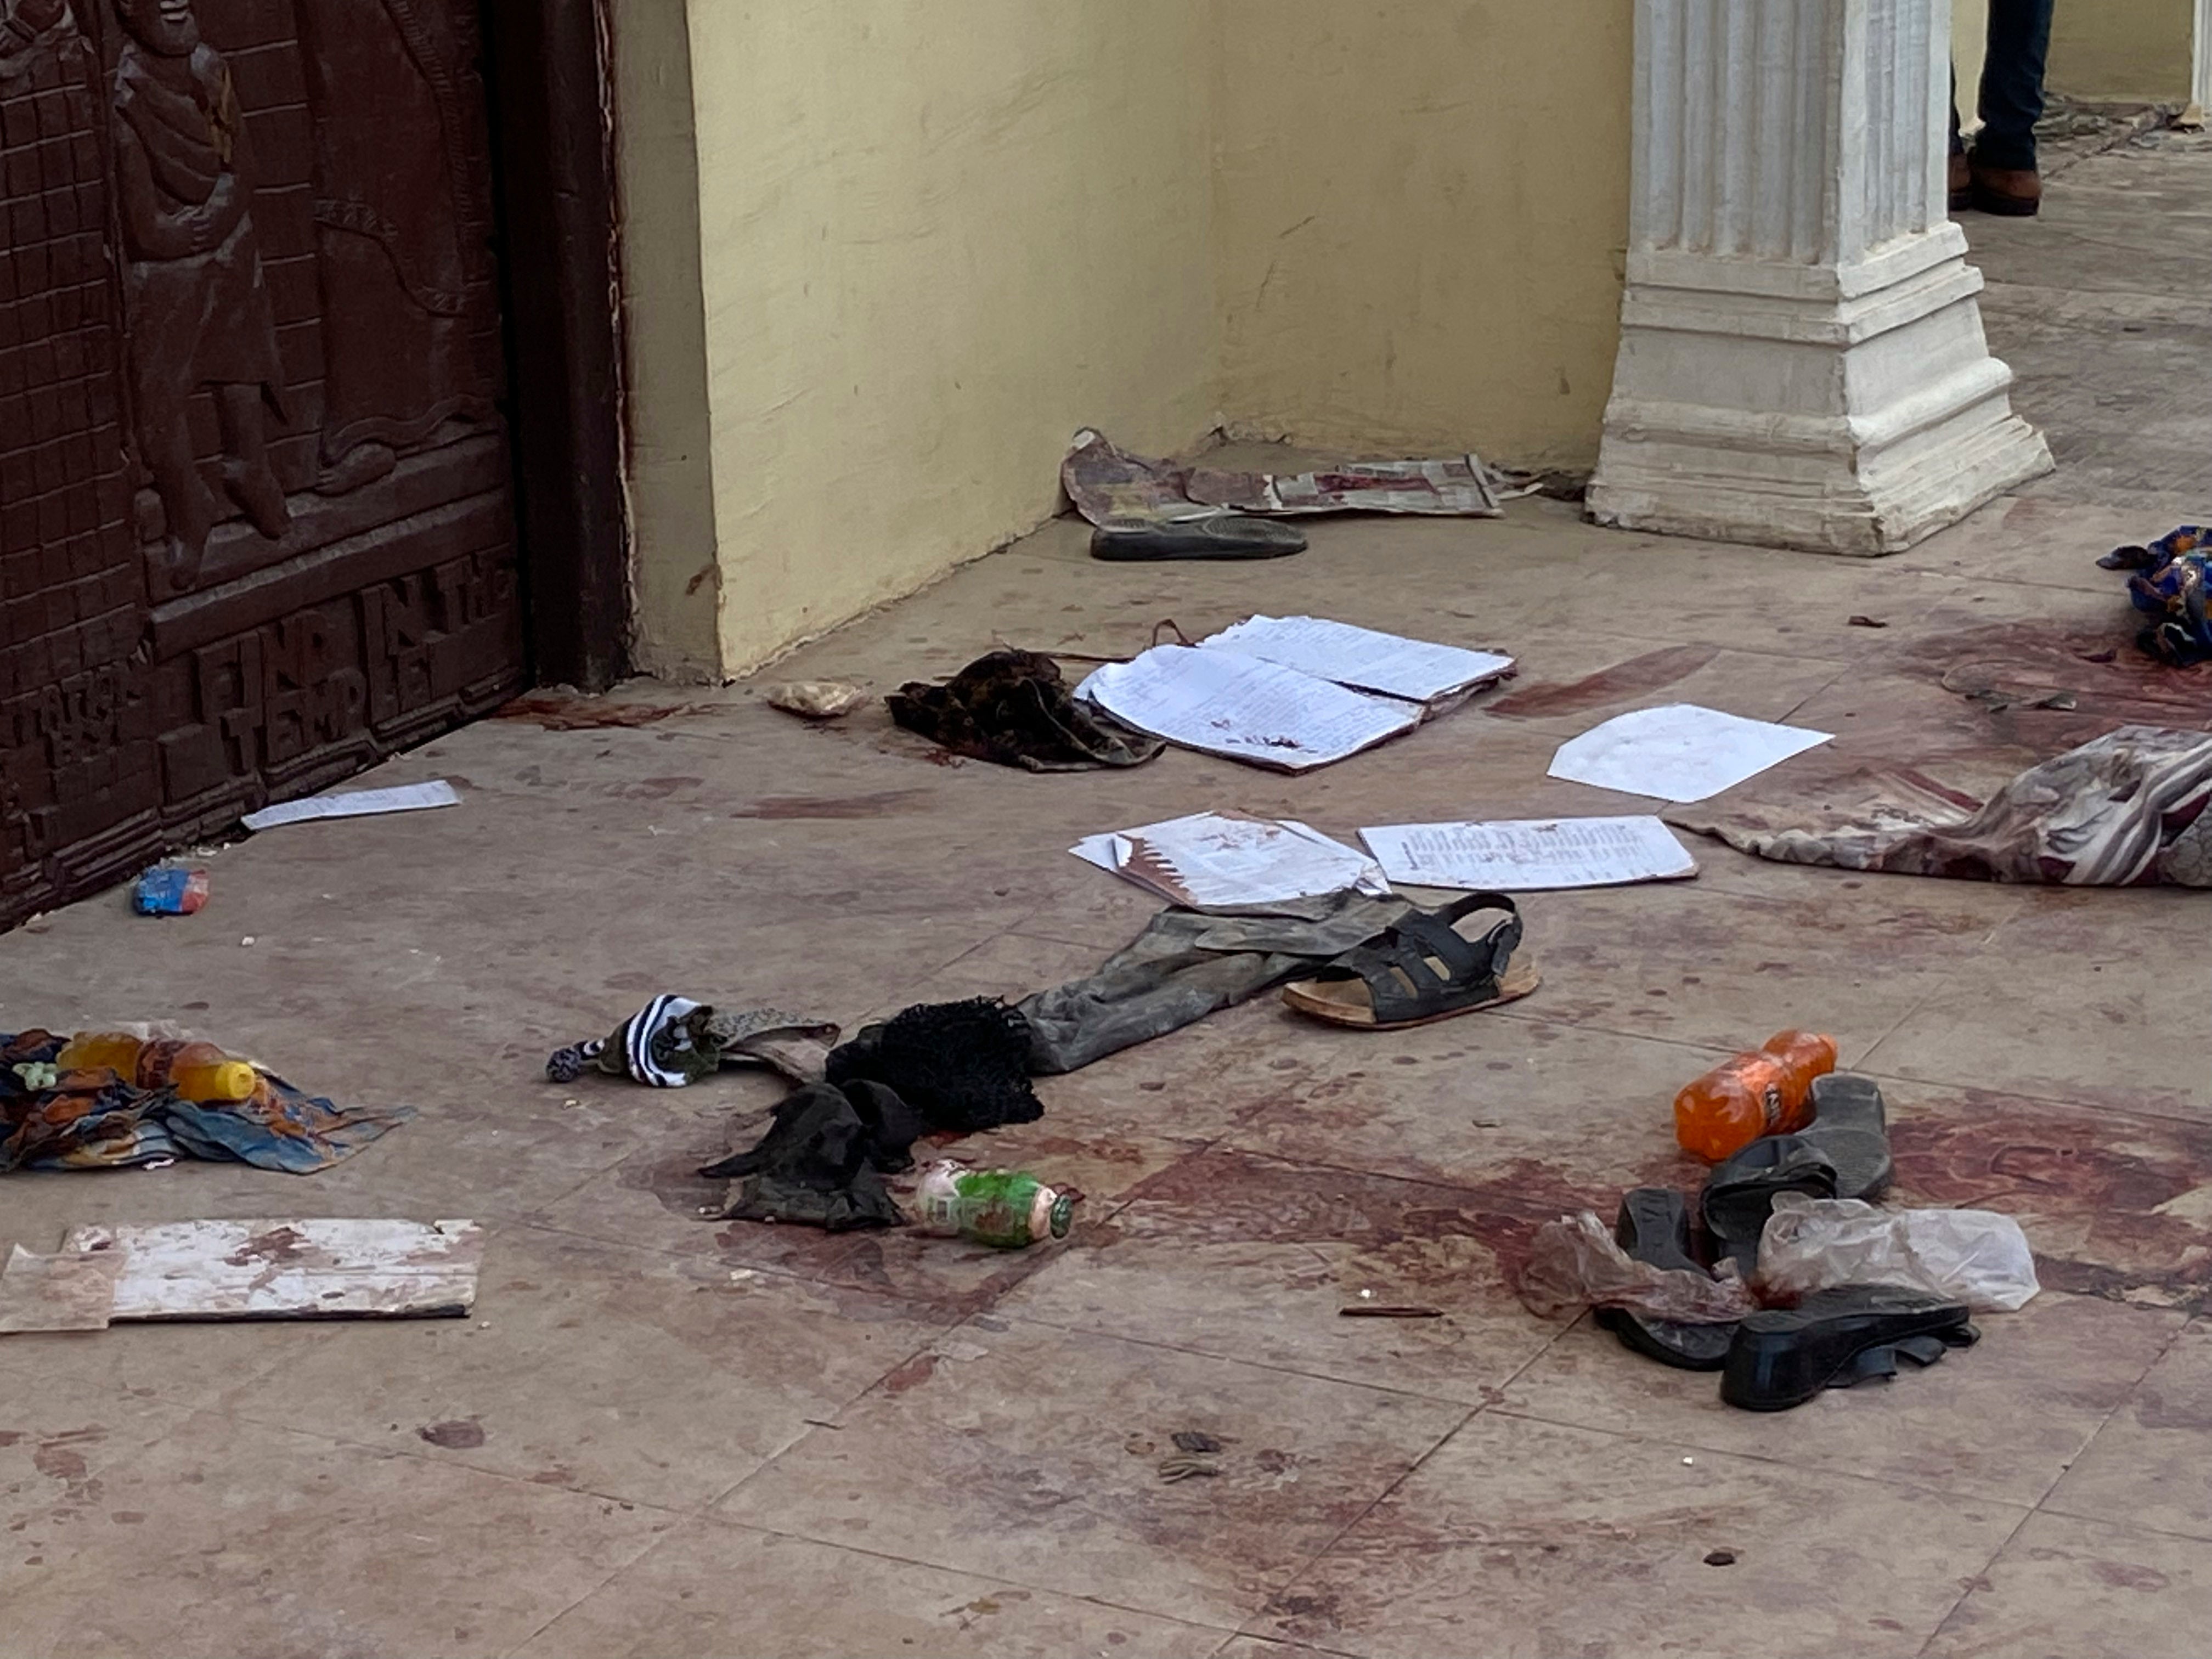 Shoes and personal belongings lie on the blood-soaked floor following the deadly attack